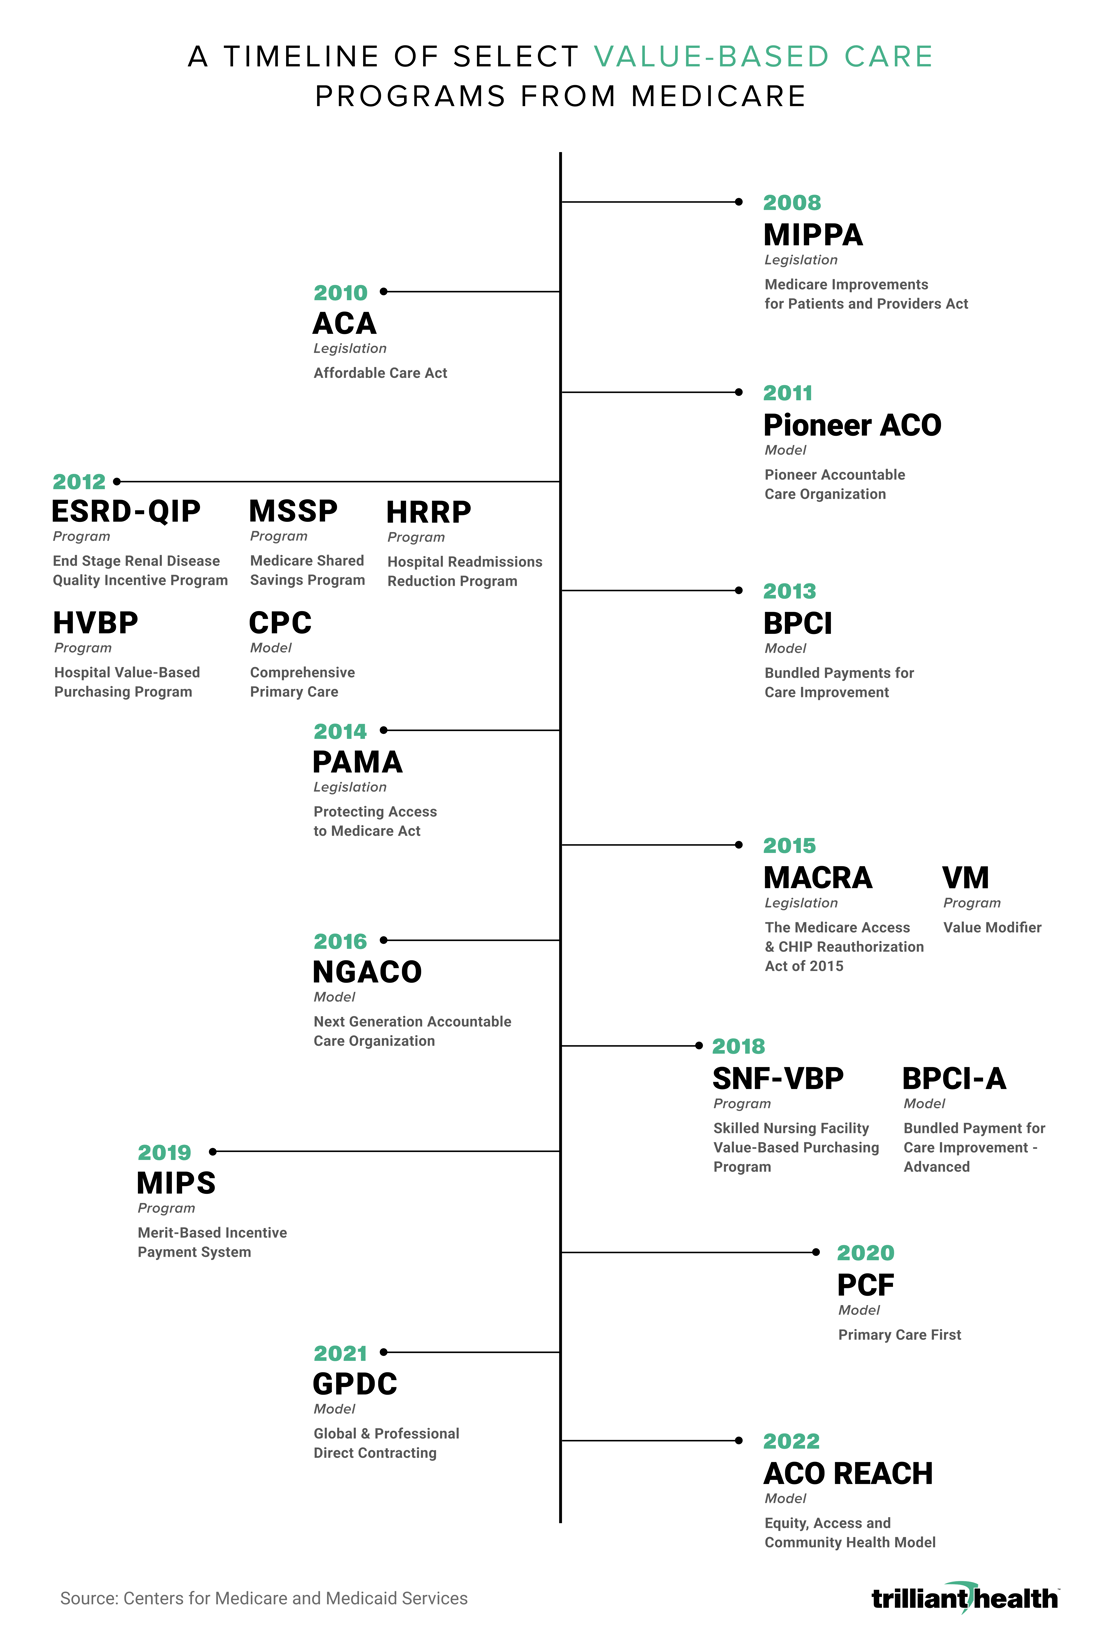 A Timeline of Select Value-Based Care Programs From Medicare